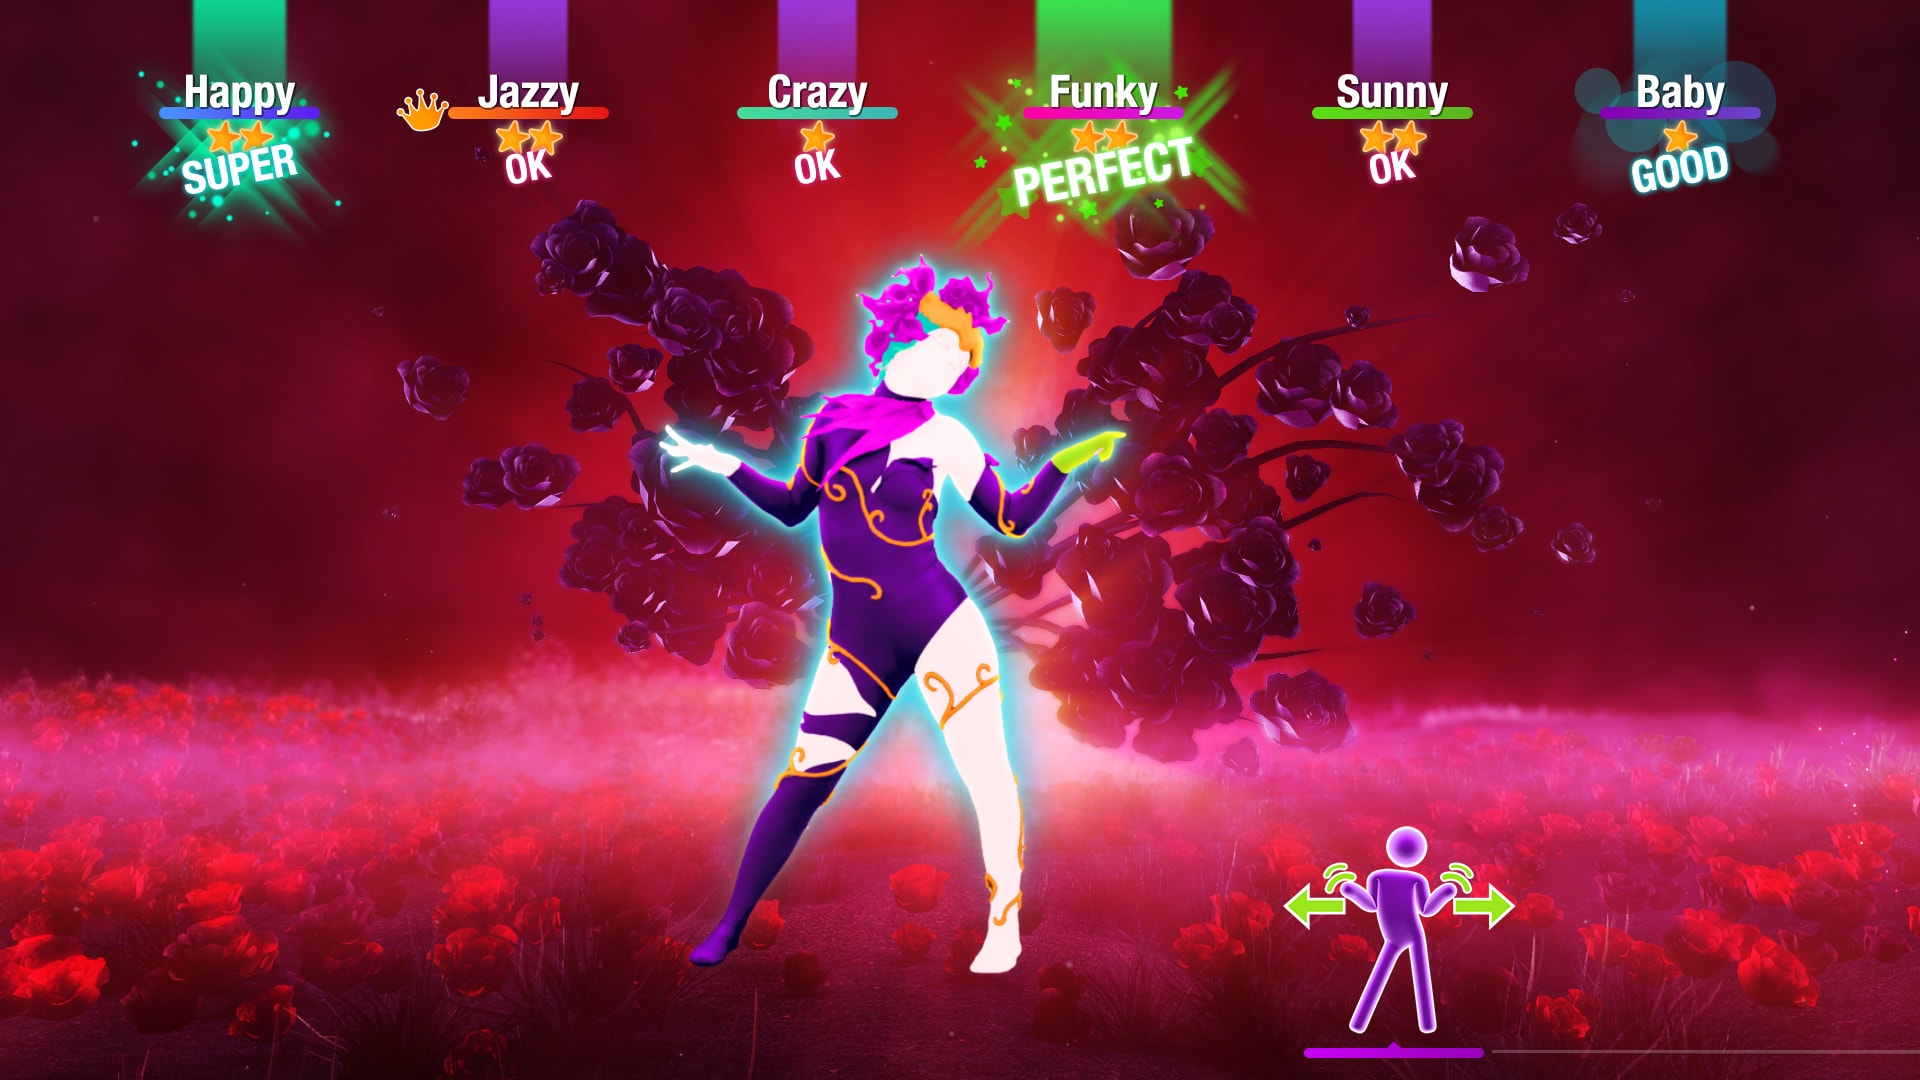 Just Dance 2020 - Digital Standard Edition on PS4 | Official PlayStation™Store Singapore1920 x 1080